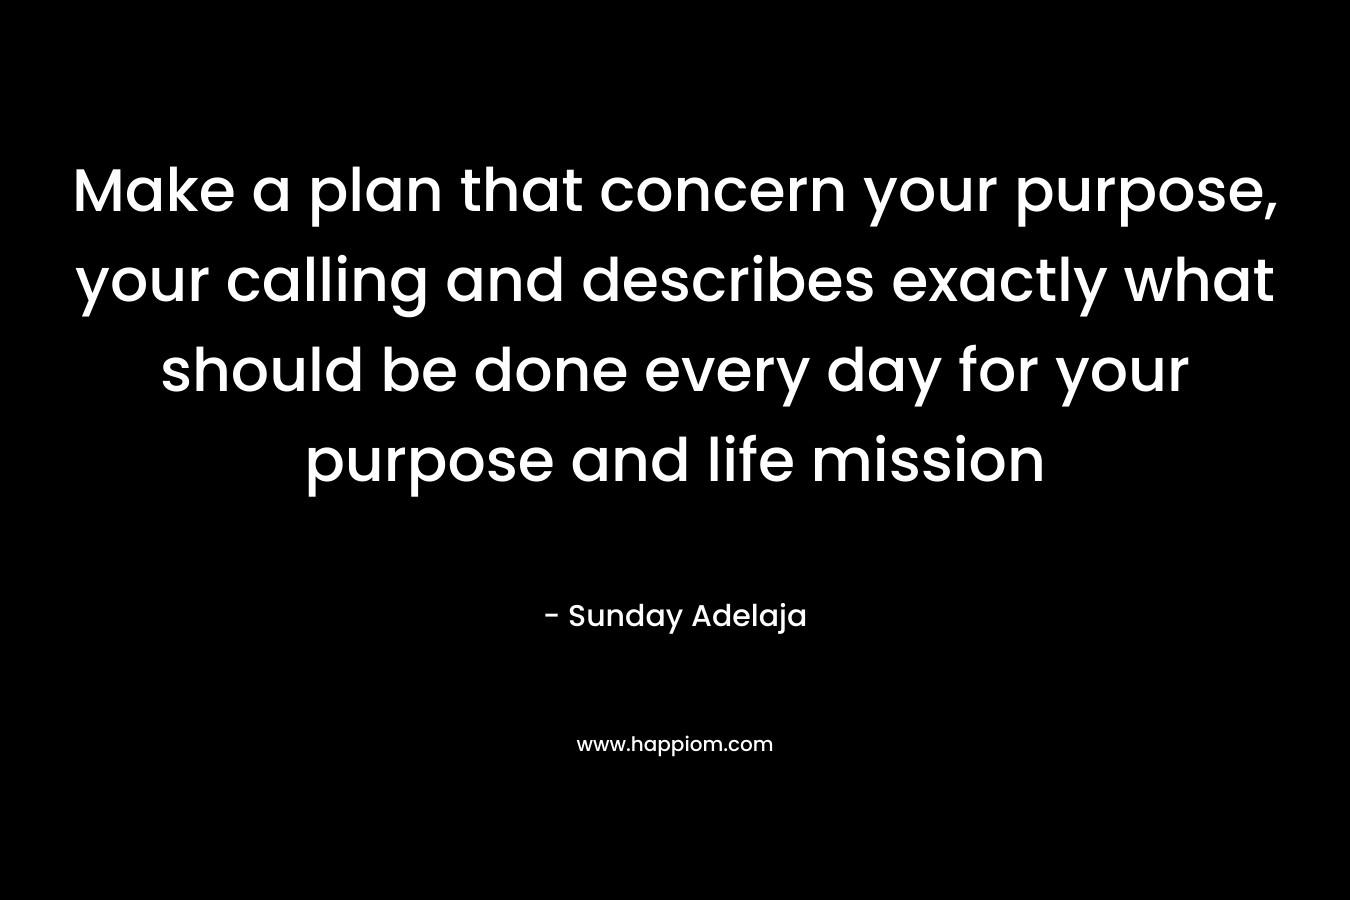 Make a plan that concern your purpose, your calling and describes exactly what should be done every day for your purpose and life mission – Sunday Adelaja